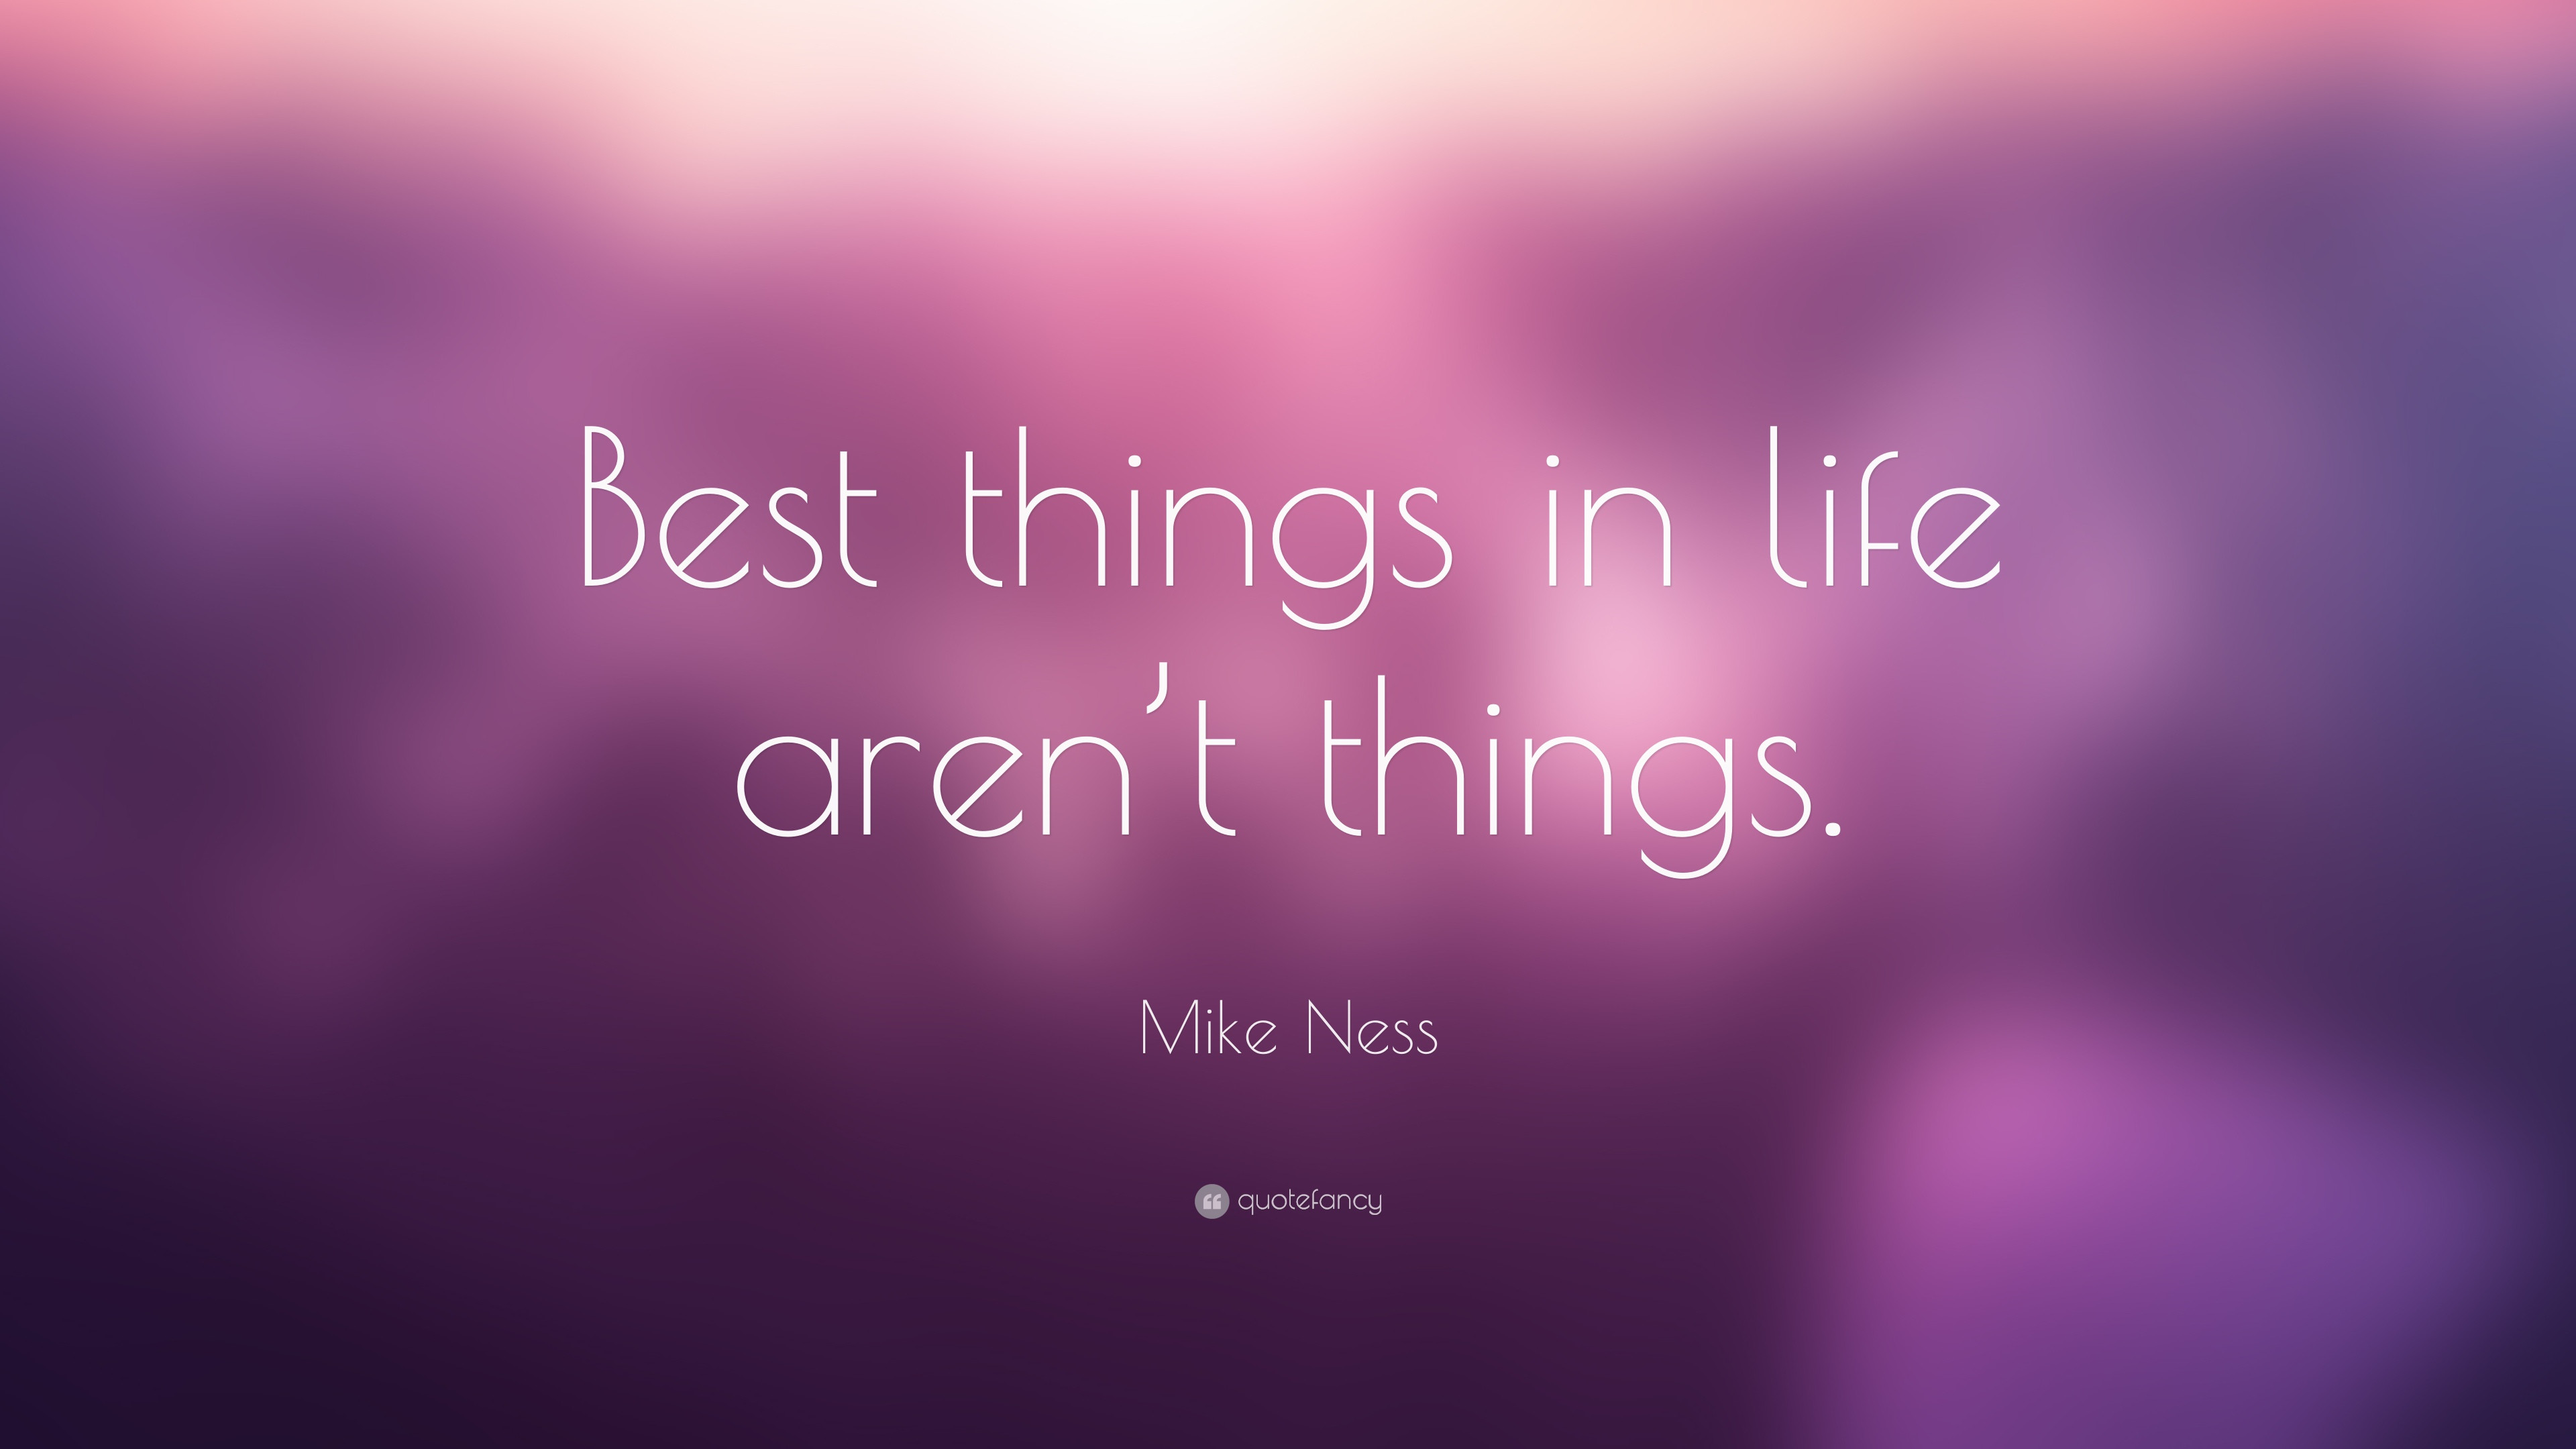 3840x2160 The Best Things In Life Aren't Things Quote Mike Ness Quote “Best Things